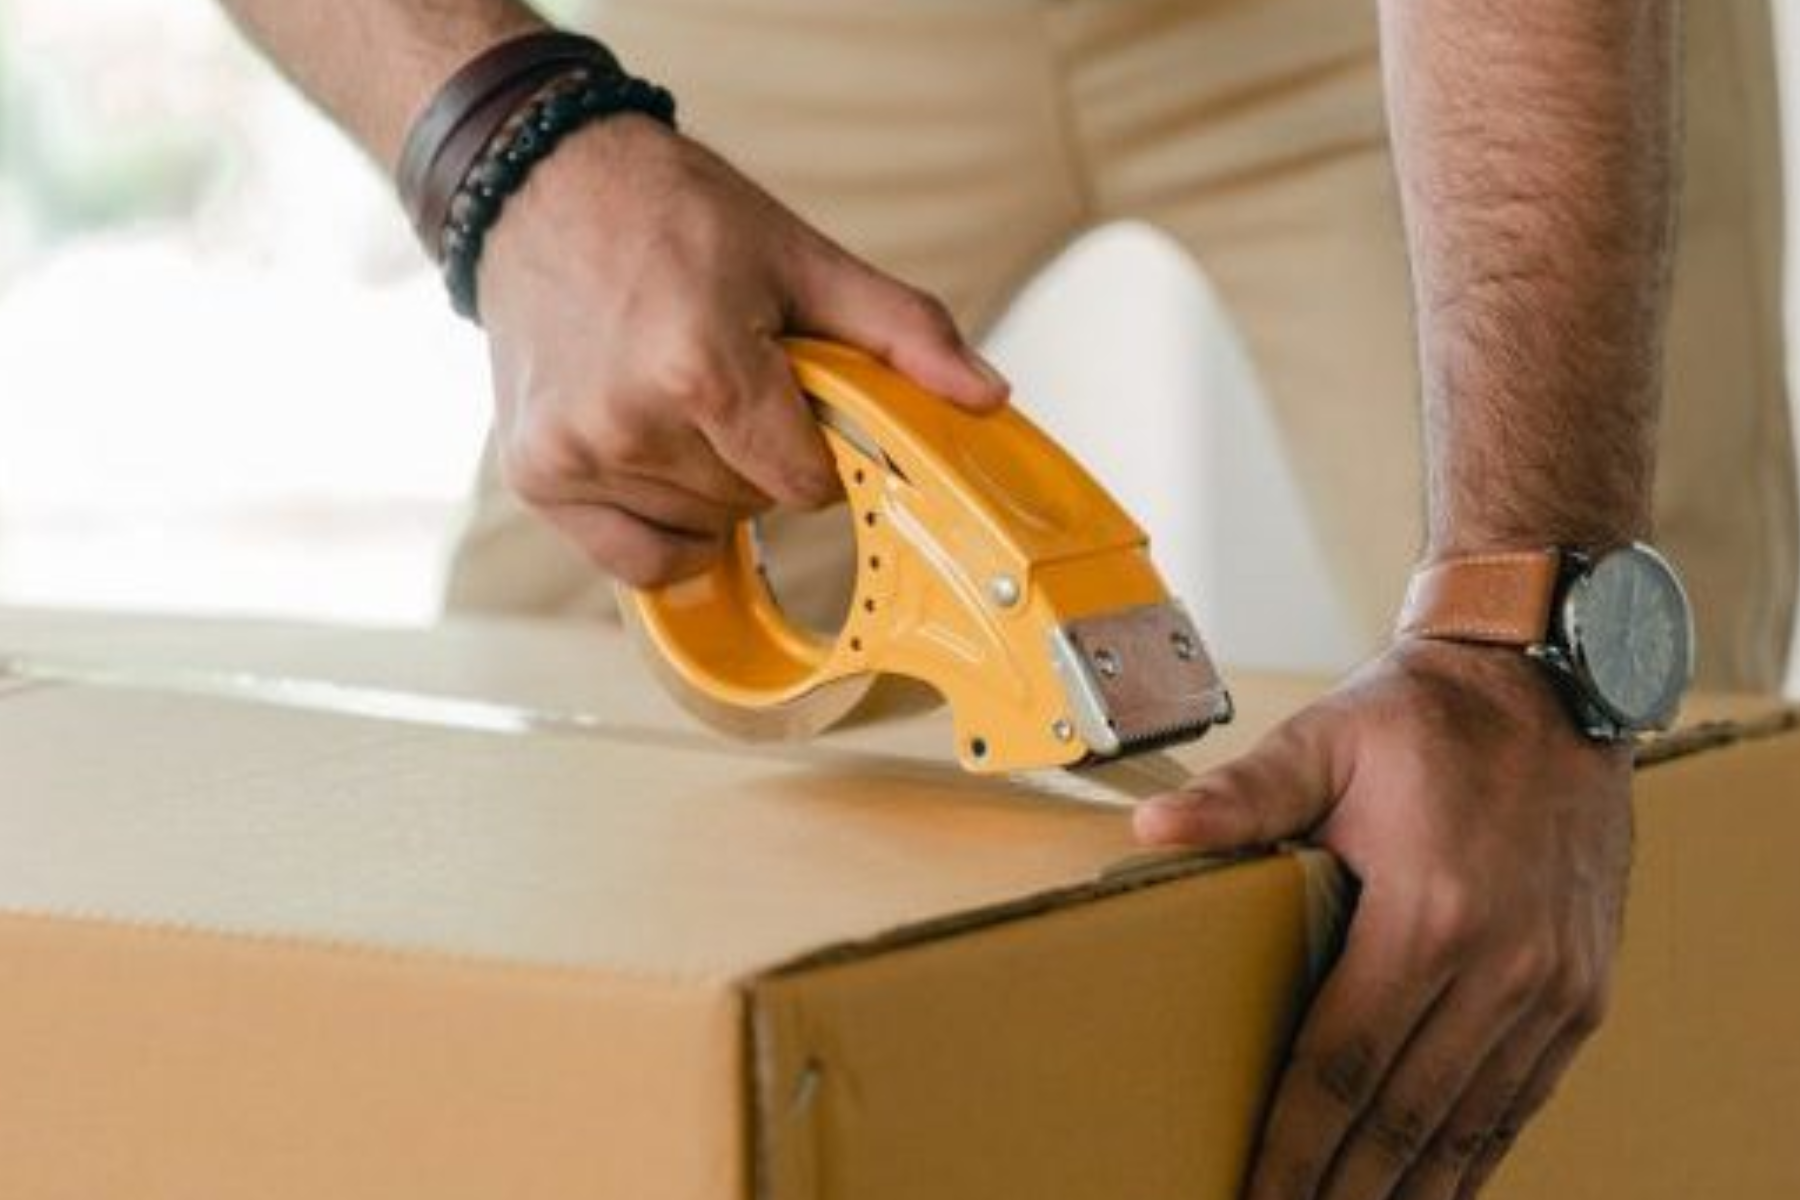 An individual is using packaging tape to seal a box